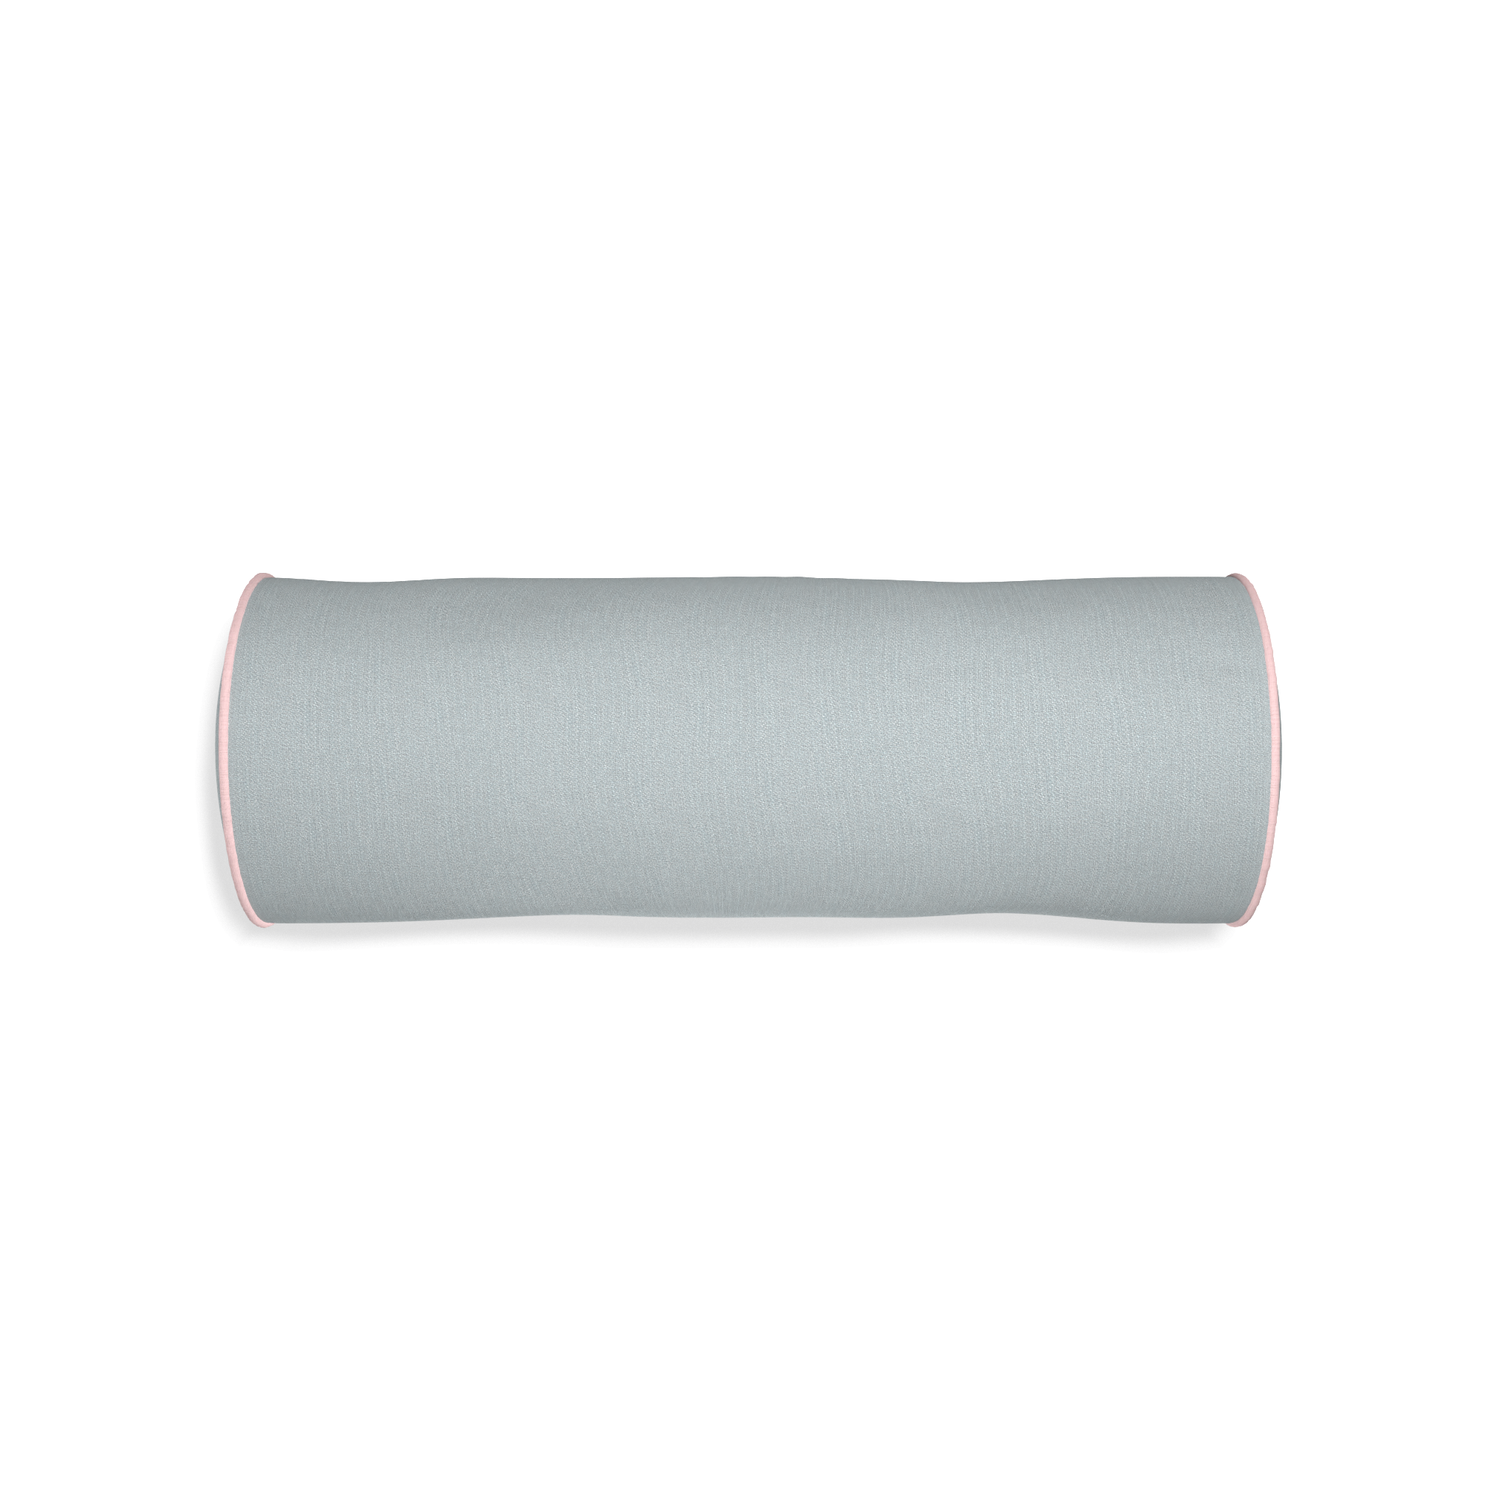 Bolster sea custom grey bluepillow with petal piping on white background